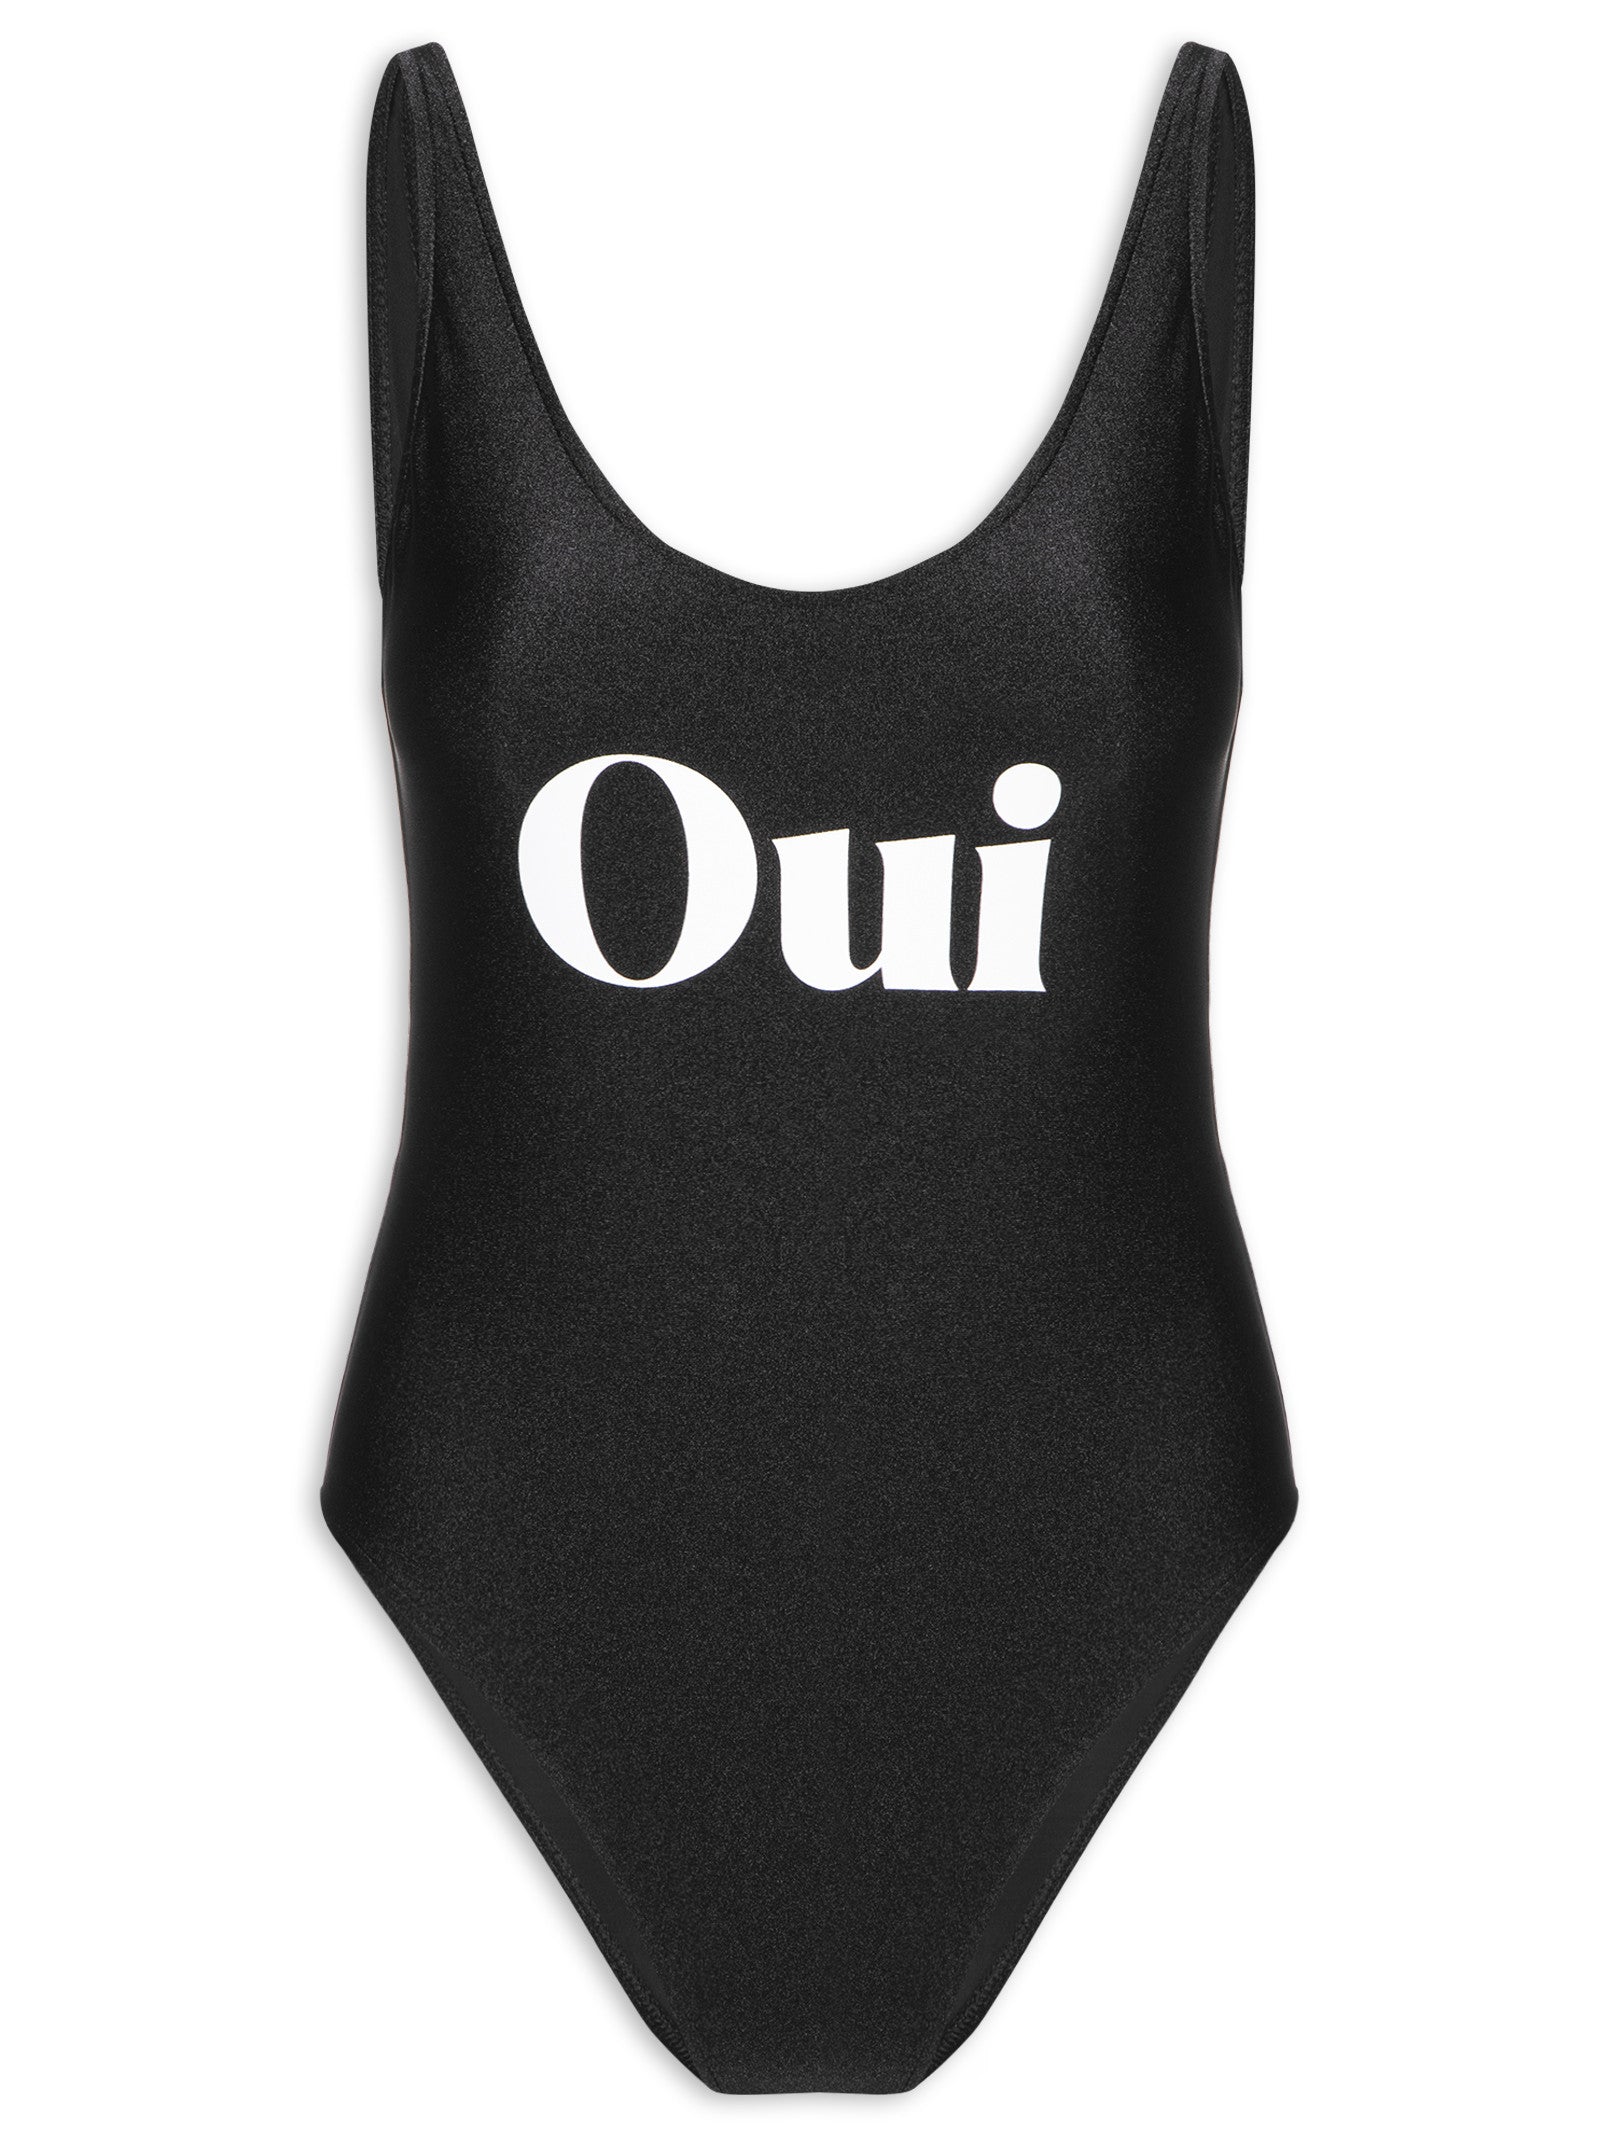 Black with Off-White Text Oui Low-Cut Swimsuit Product